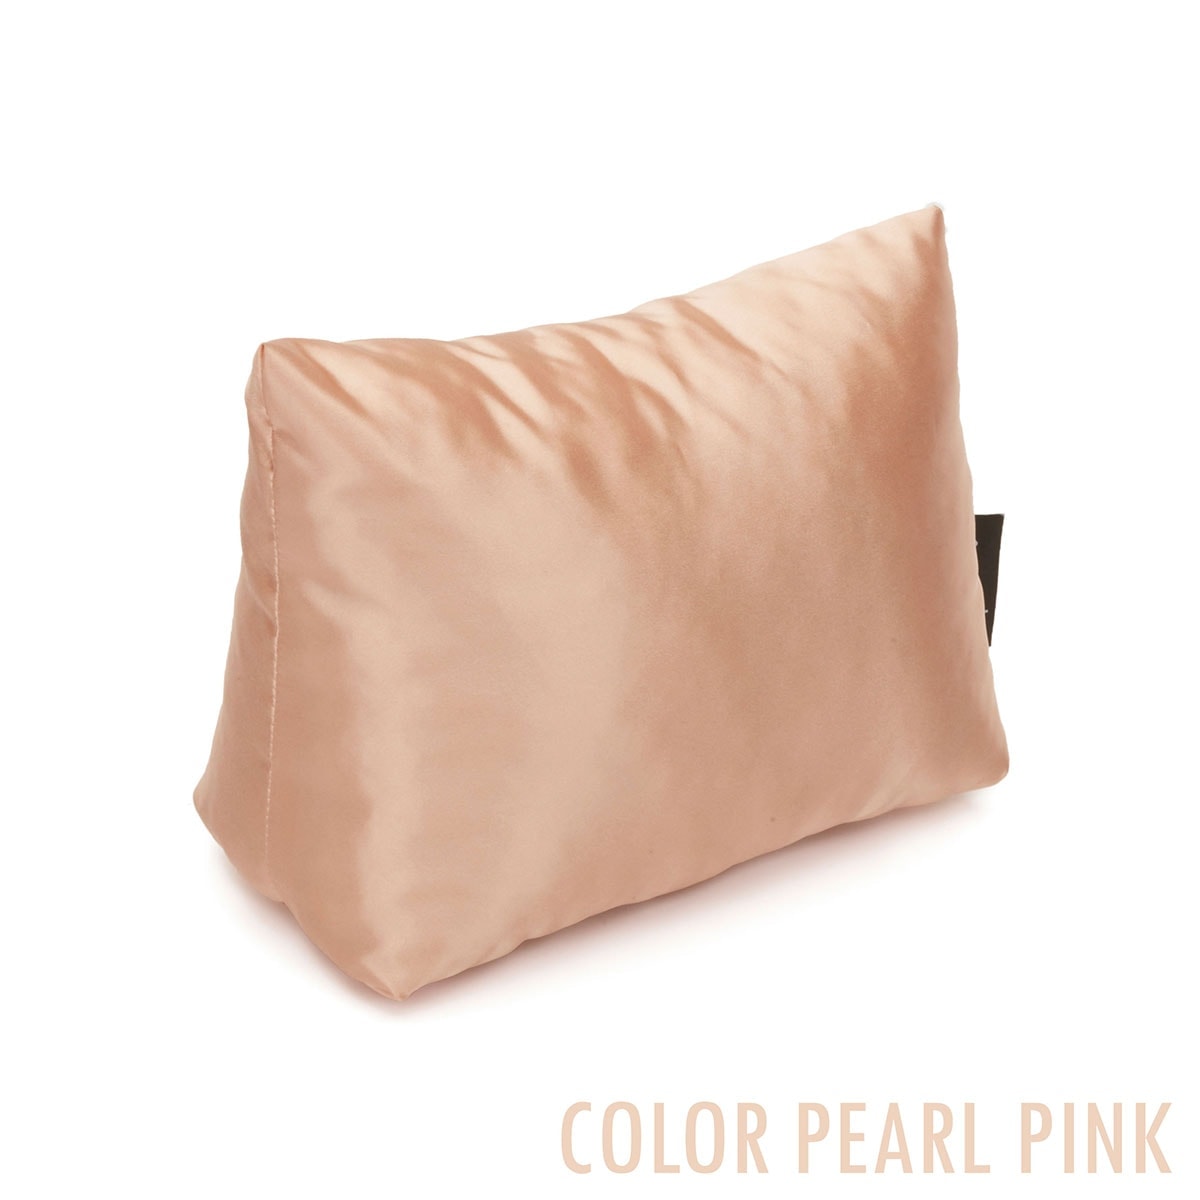  Satin Pillow Luxury Bag Shaper in Champagne Compatible for the  Designer Bag Neverfull MM : Handmade Products